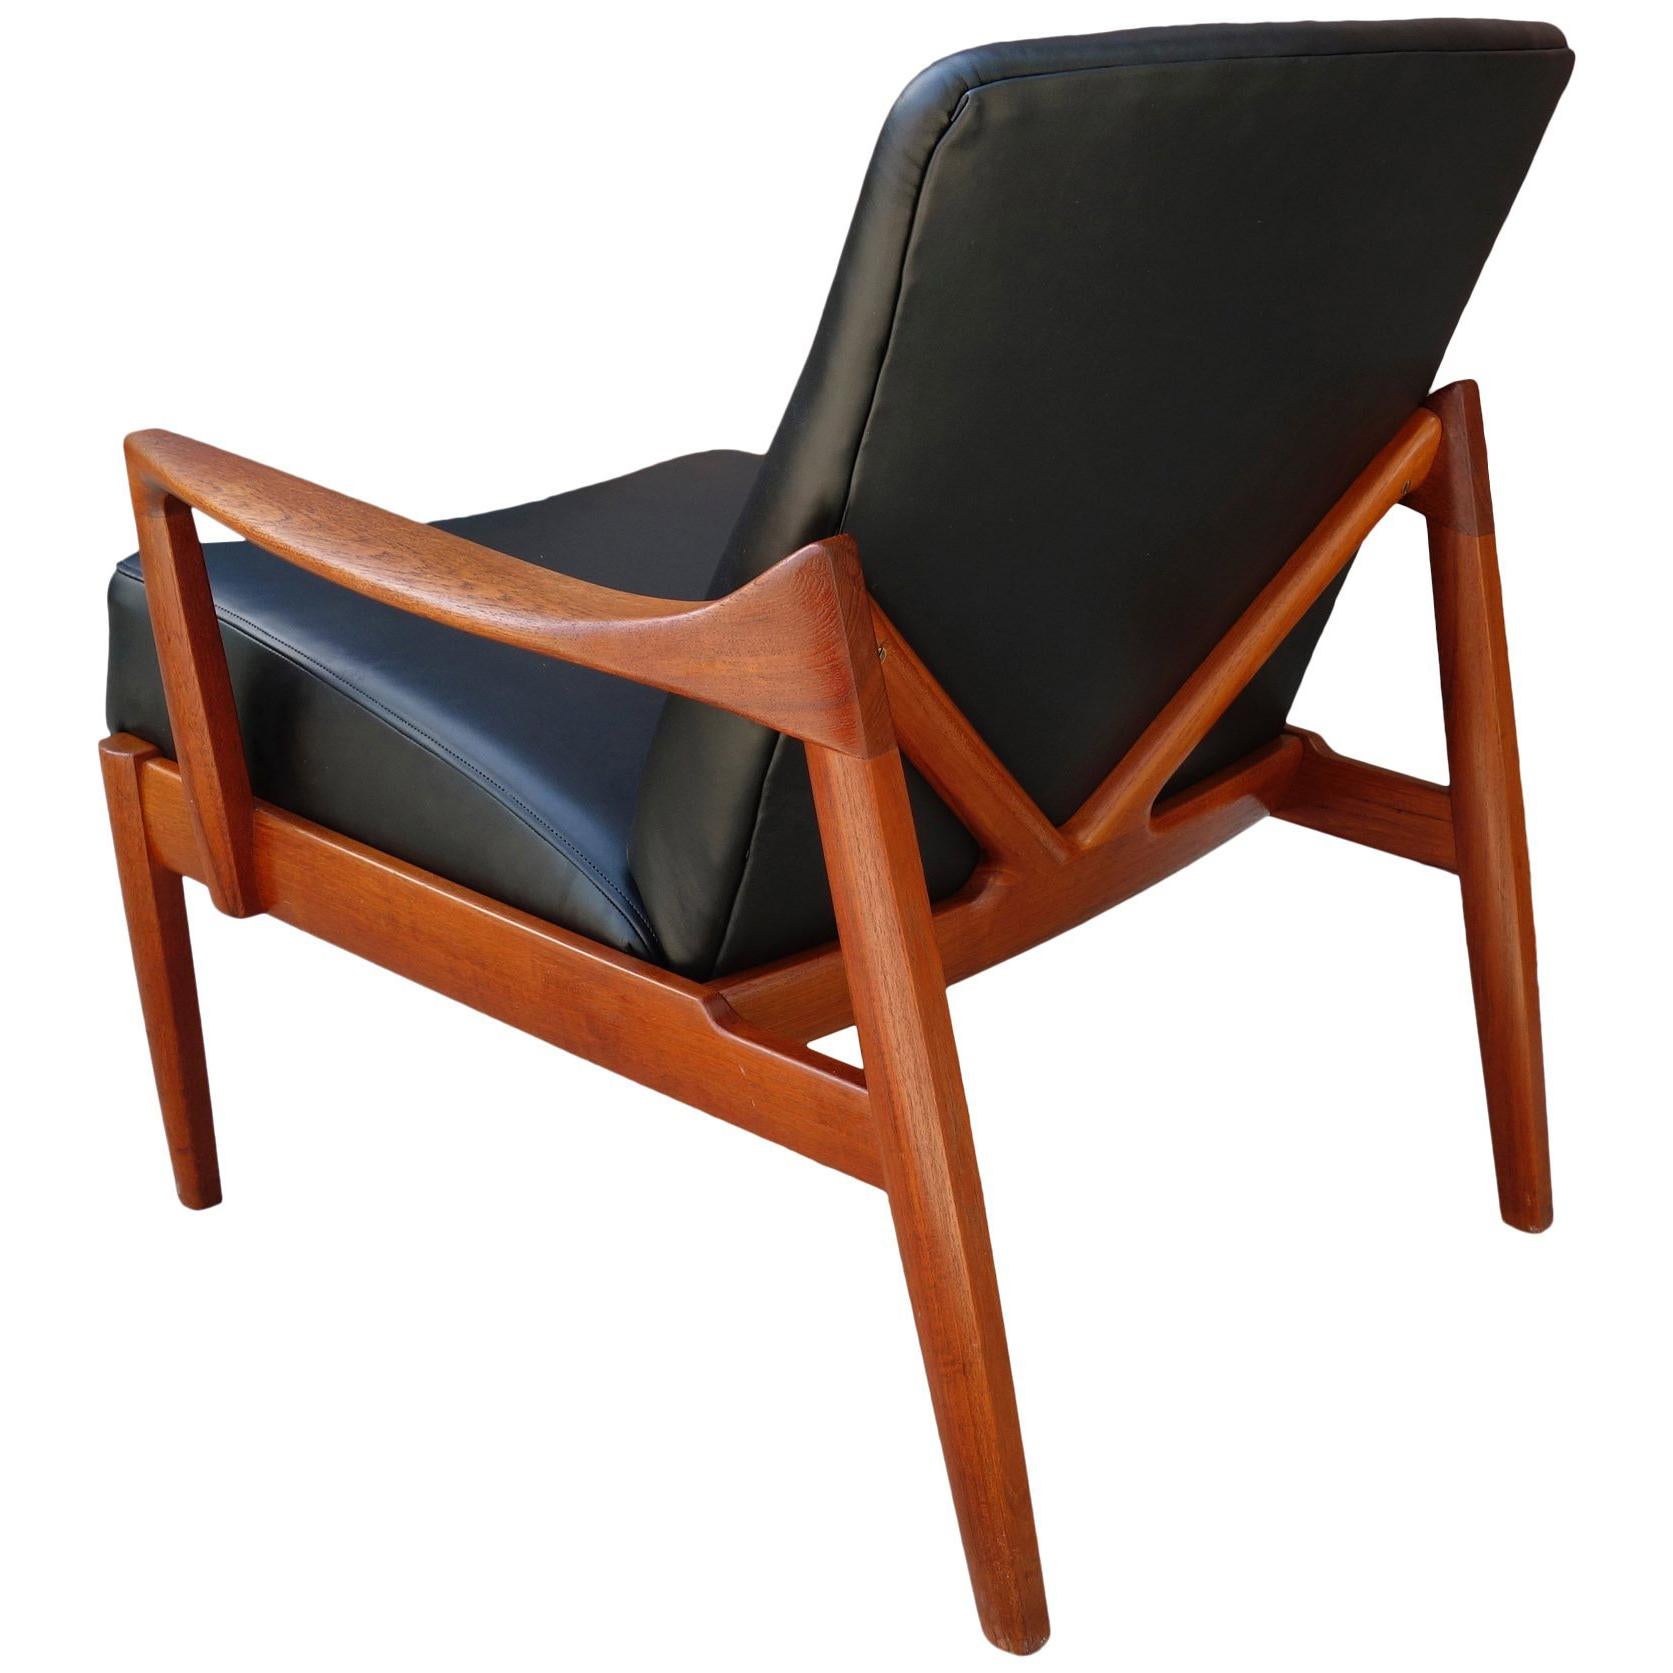 Model 125 in teak wood and black leather

This exquisite Danish modern lounge chair has been recovered in soft black leather and the frame left in original condition with a warm glow and wonderful patina. Incredibly comfortable and equally